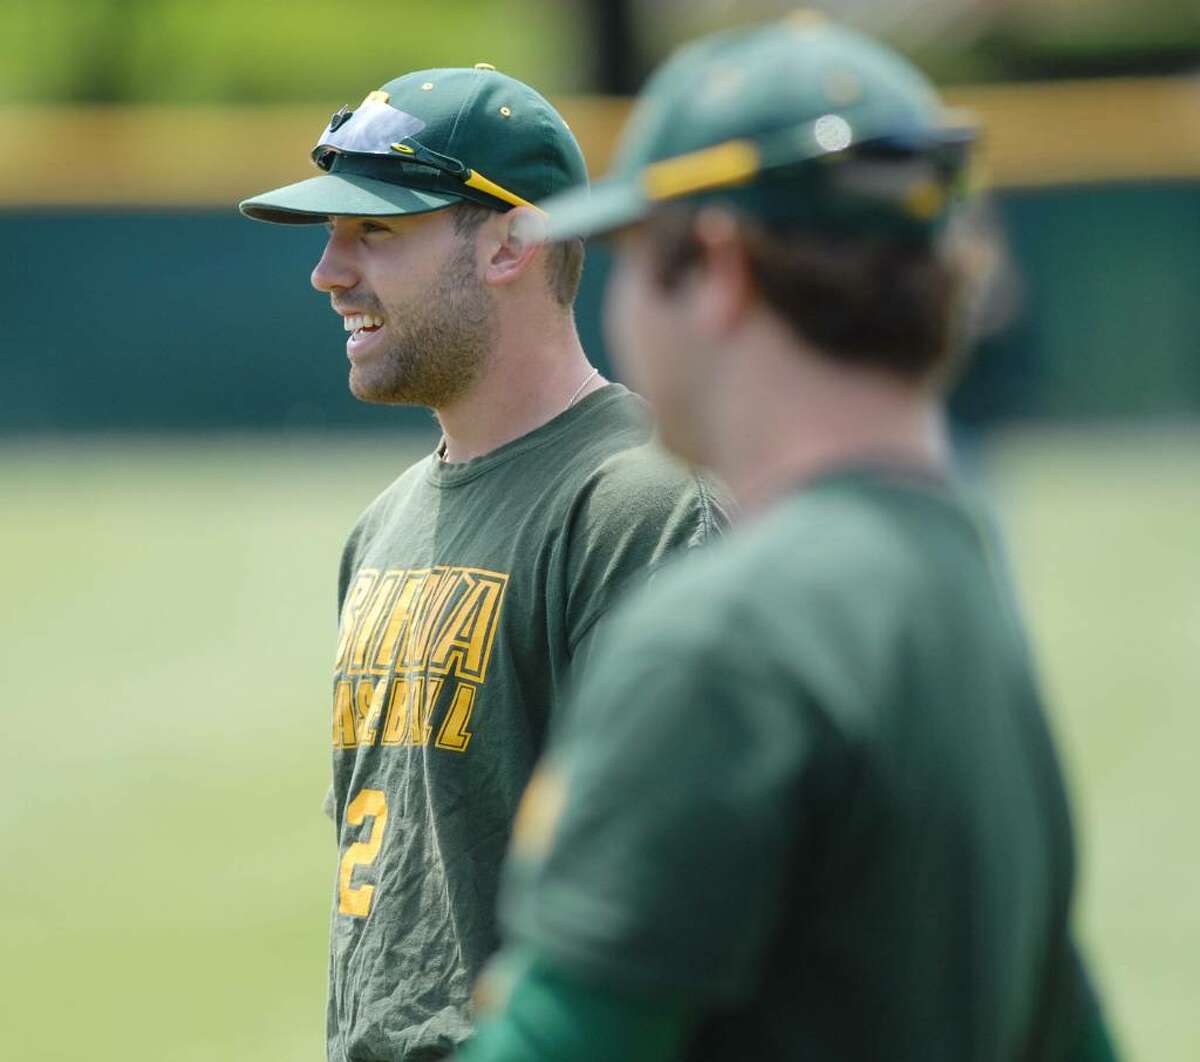 Siena baseball player Dan Paolini, left, takes part in practice at Siena College. Paolini has set a new school record with 22 home runs this year. He leads the entire country in home runs per game. (Paul Buckowski / Times Union)